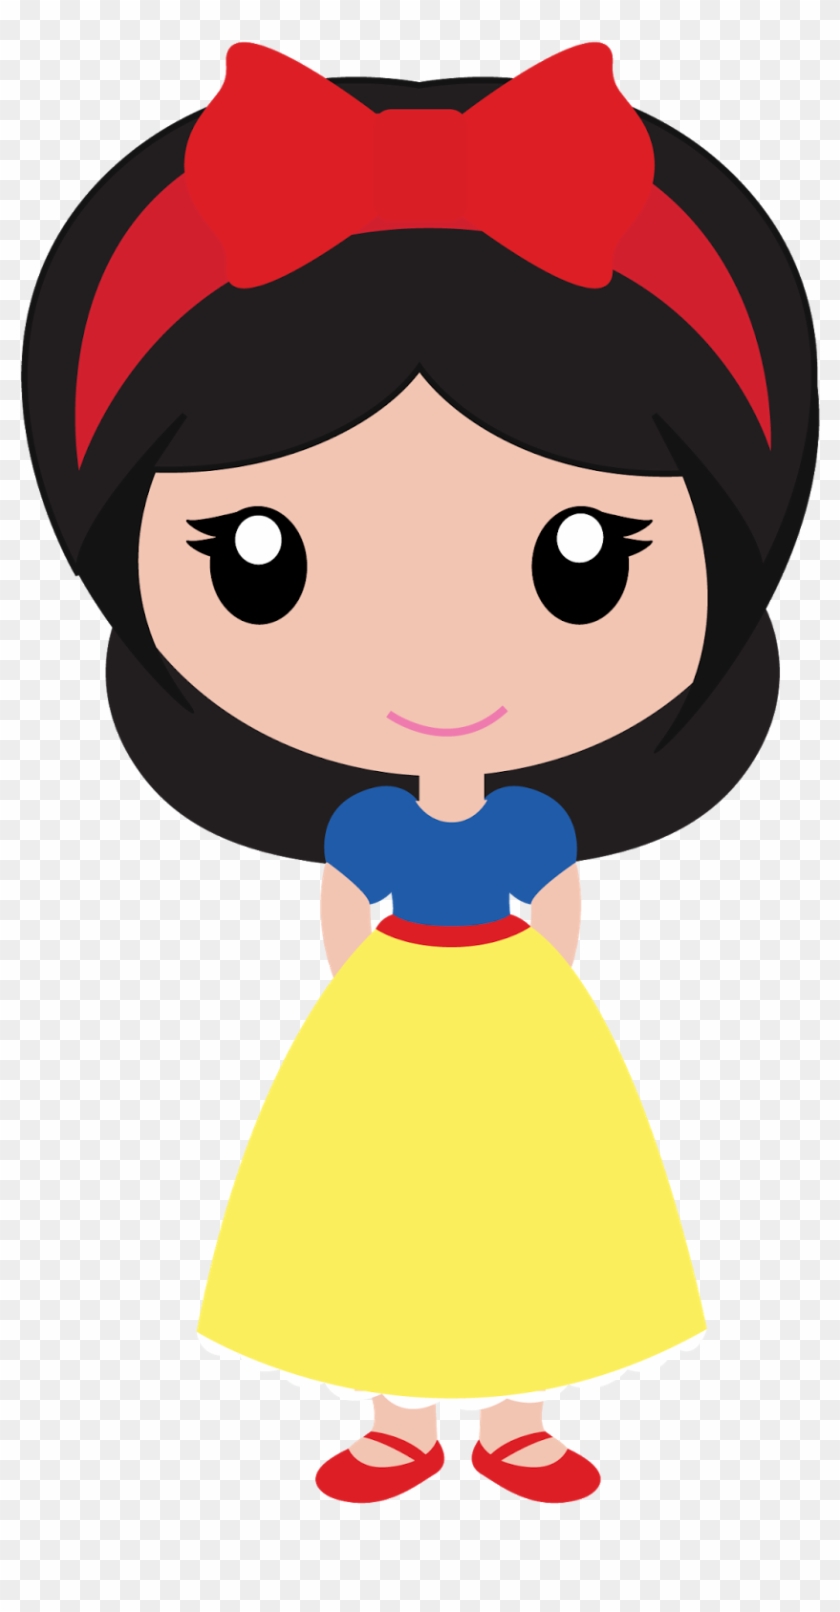 Eps Vector Of Giggle And Print - Free Snow White Printables #815036